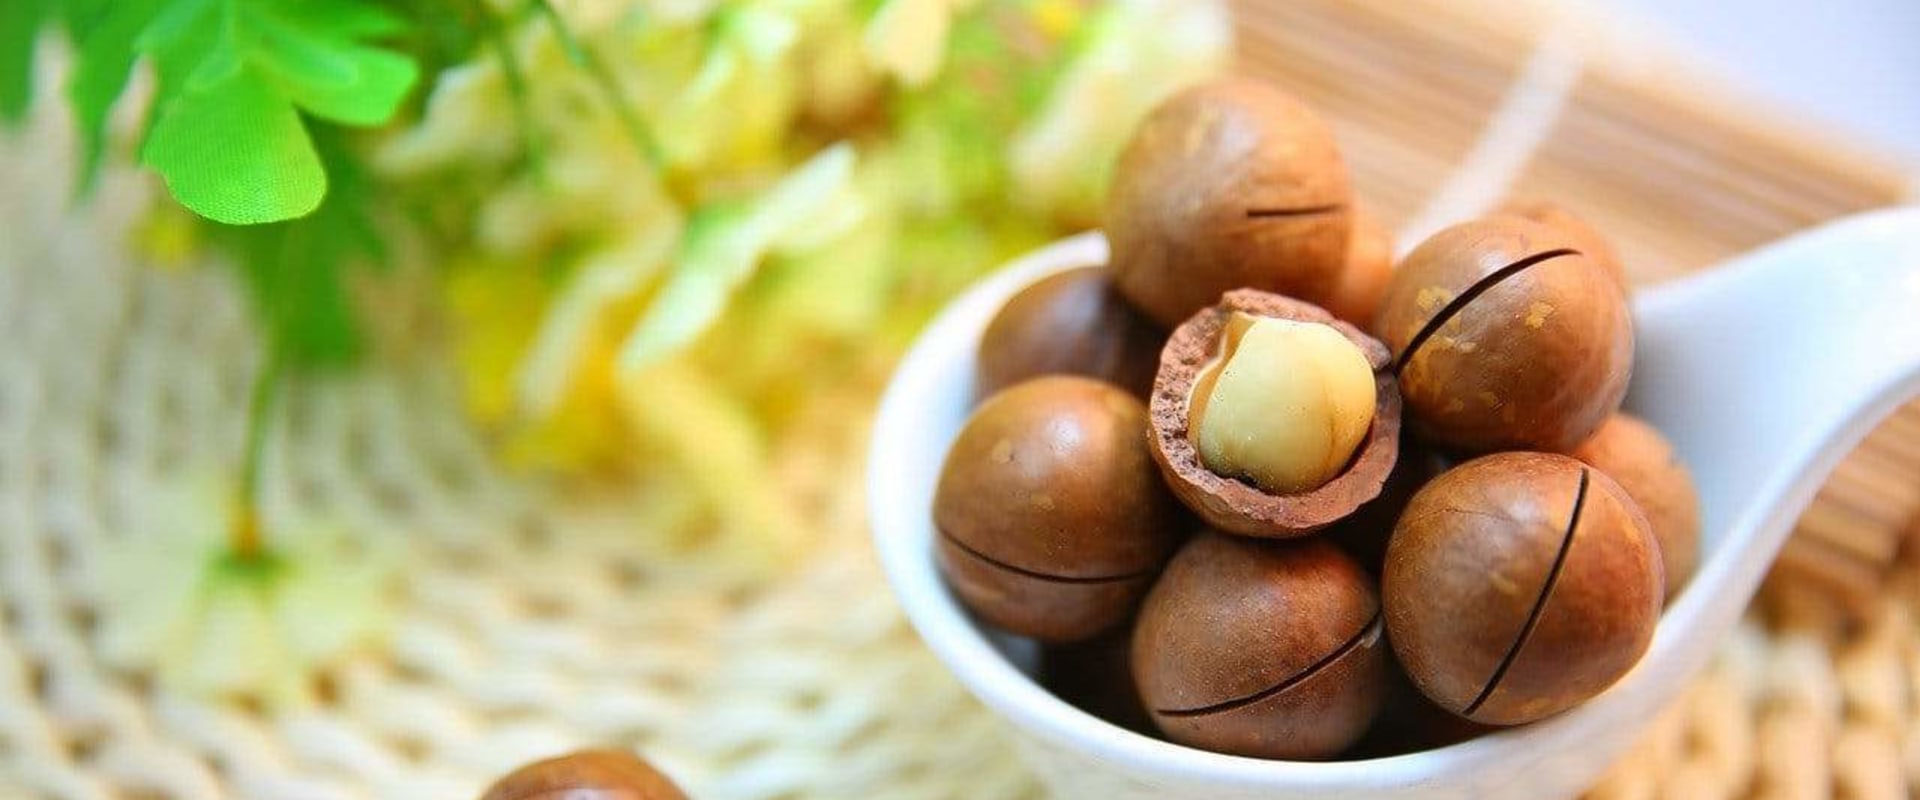 How do you know when macadamia nuts are ready to eat?